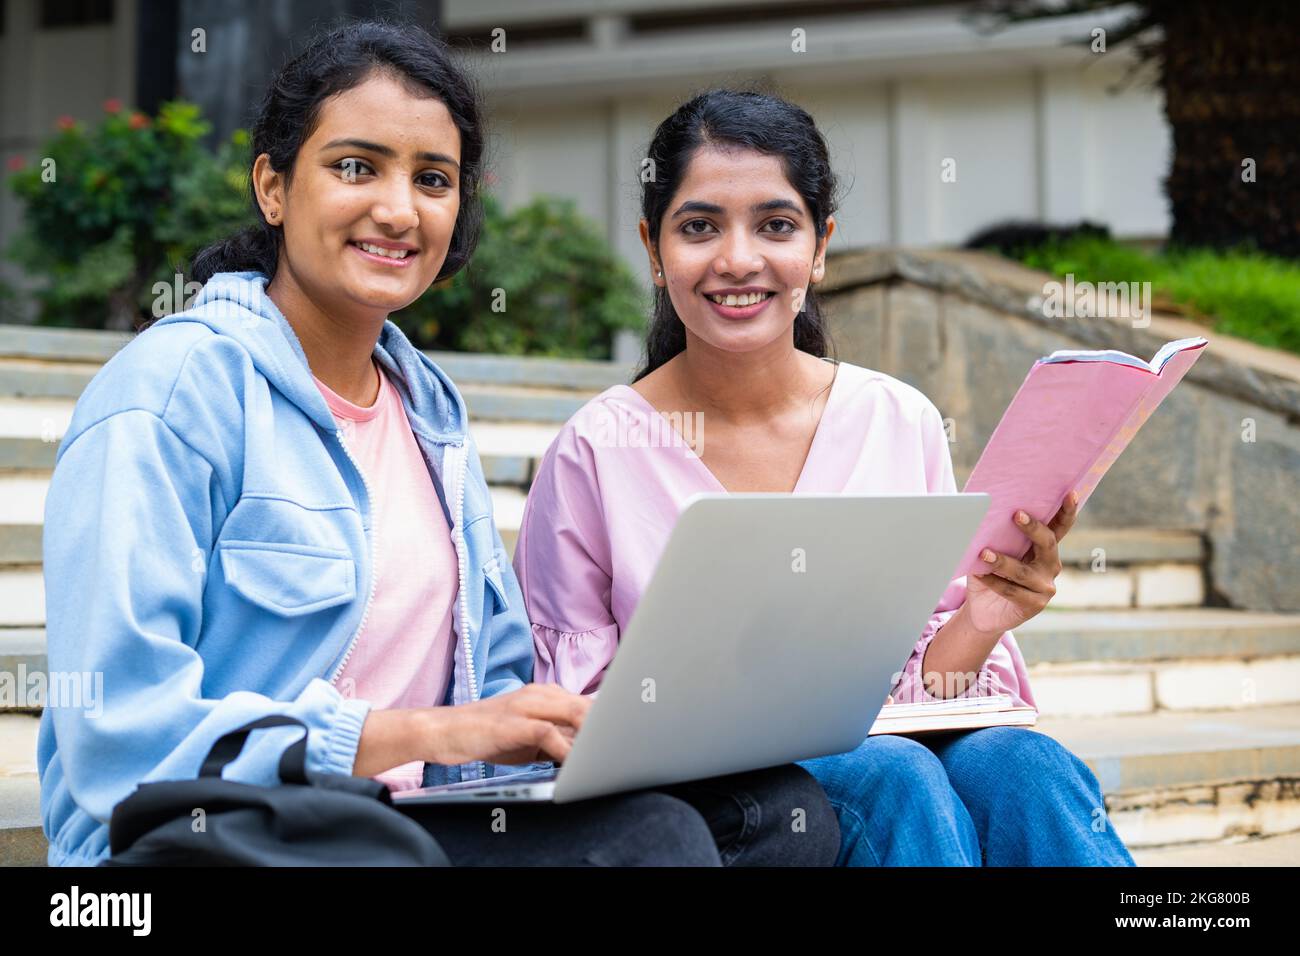 focus on girl with book, Happy College students looking at camera while busy working on laptop on university campus - concept of education, teamwork Stock Photo